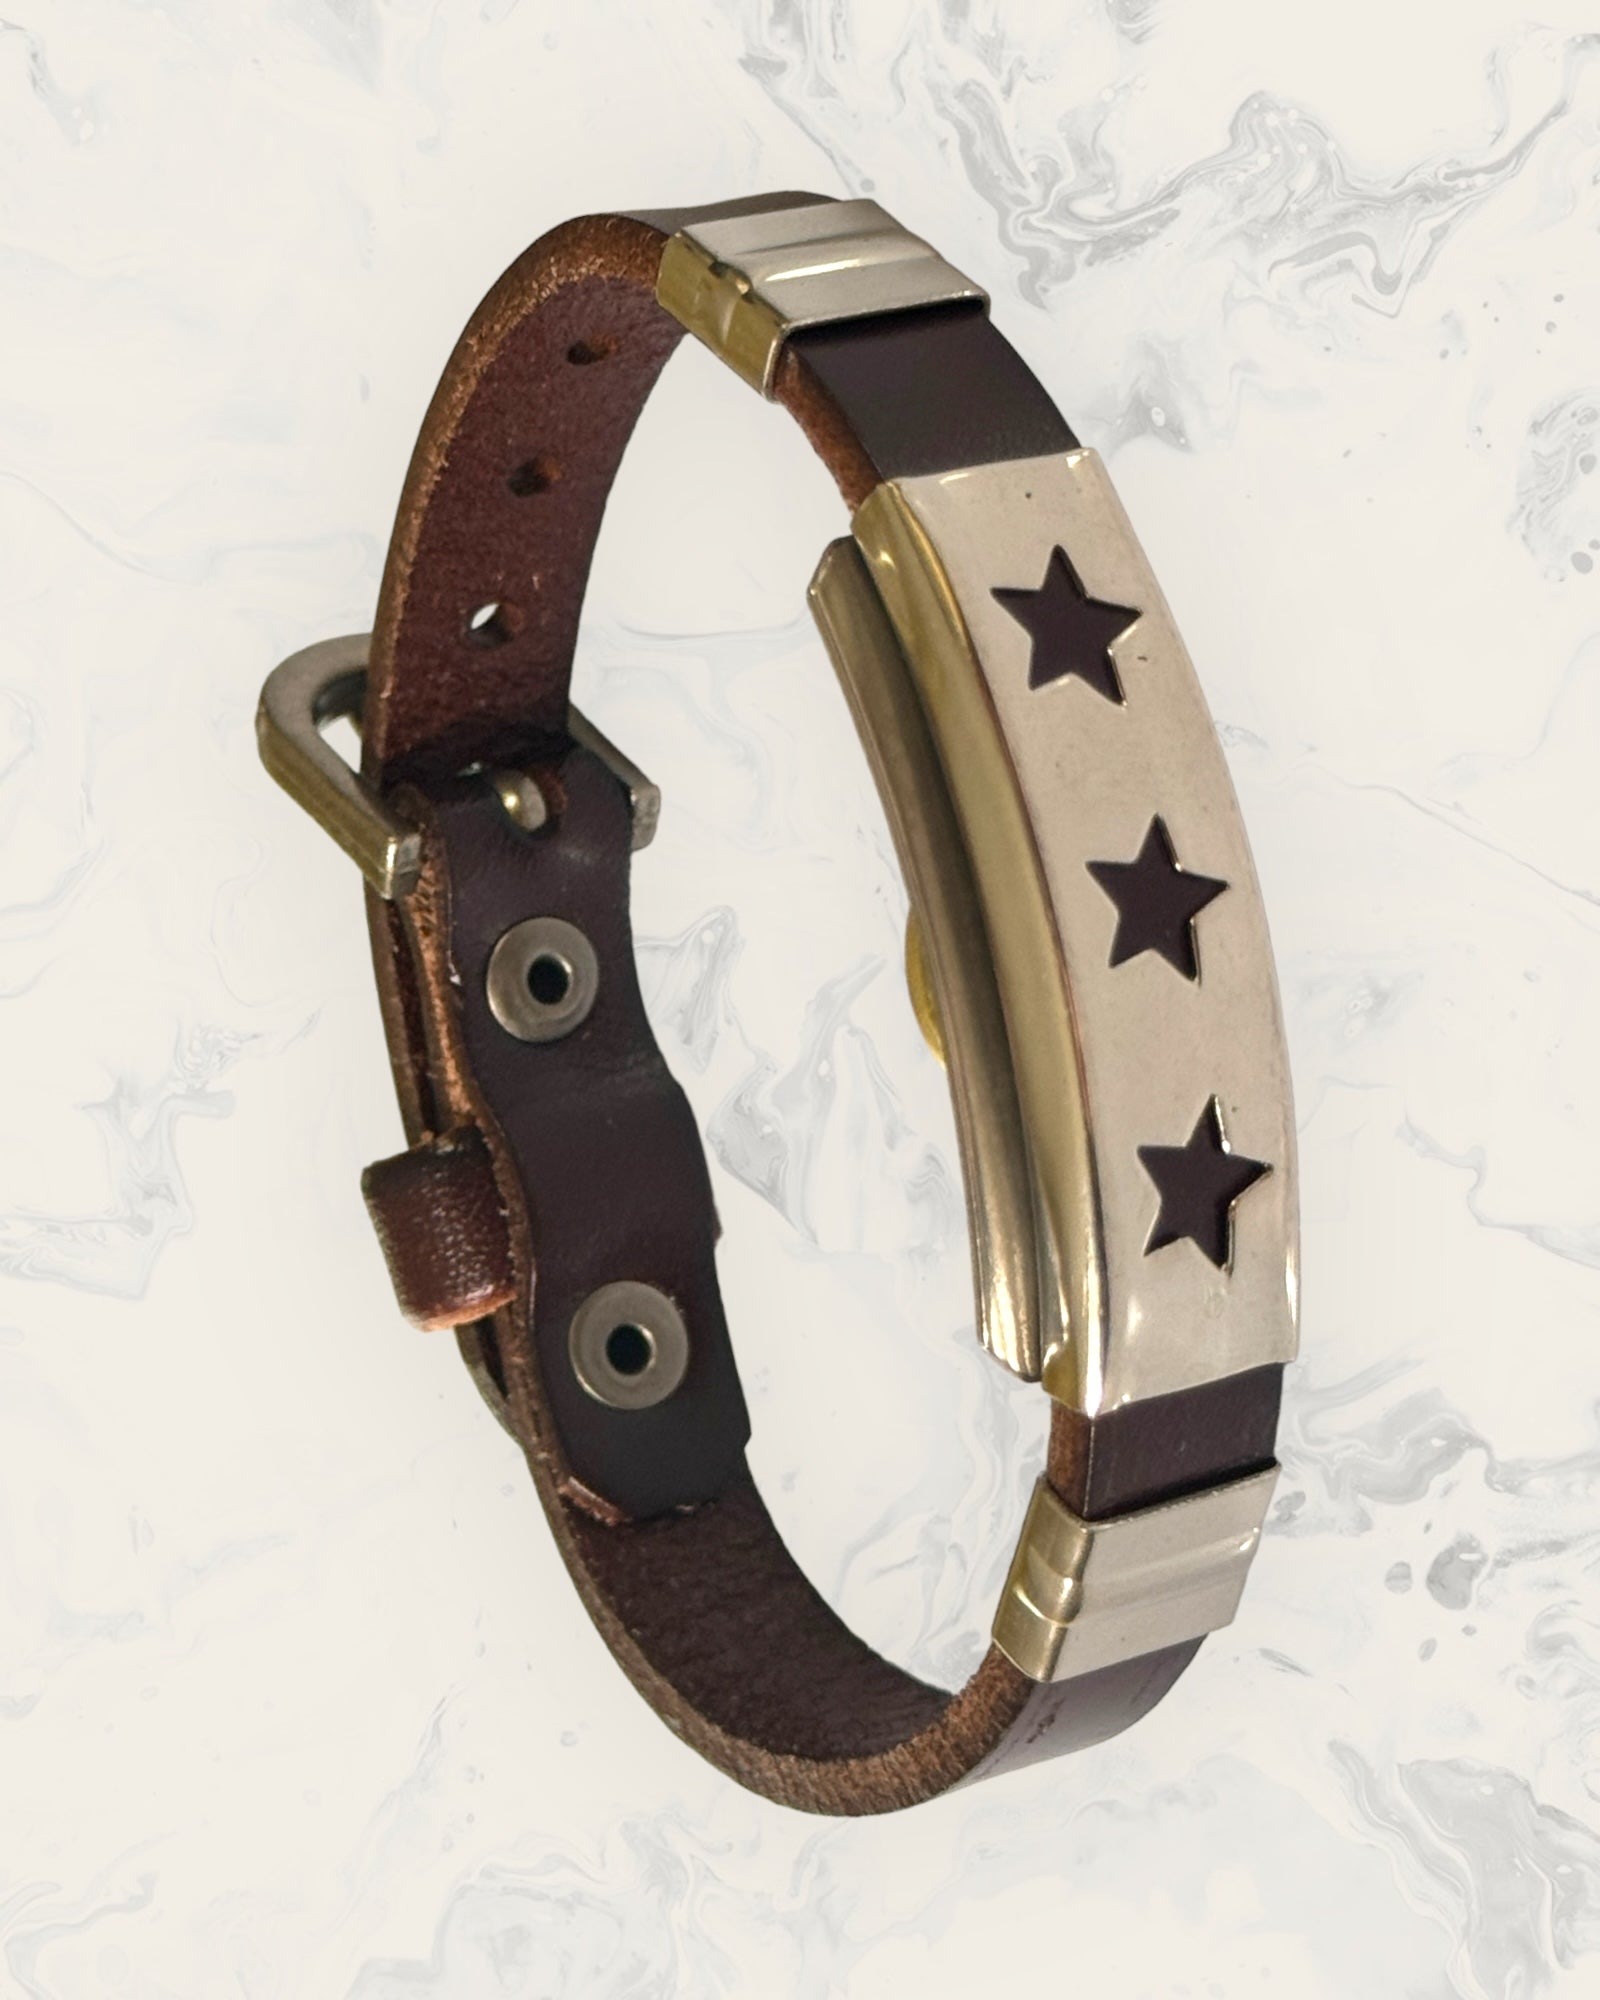 Natural Pain Relief and EMF Protection Bracelet Leather Band Color Dark Brown with a Star design on a silver metal slider